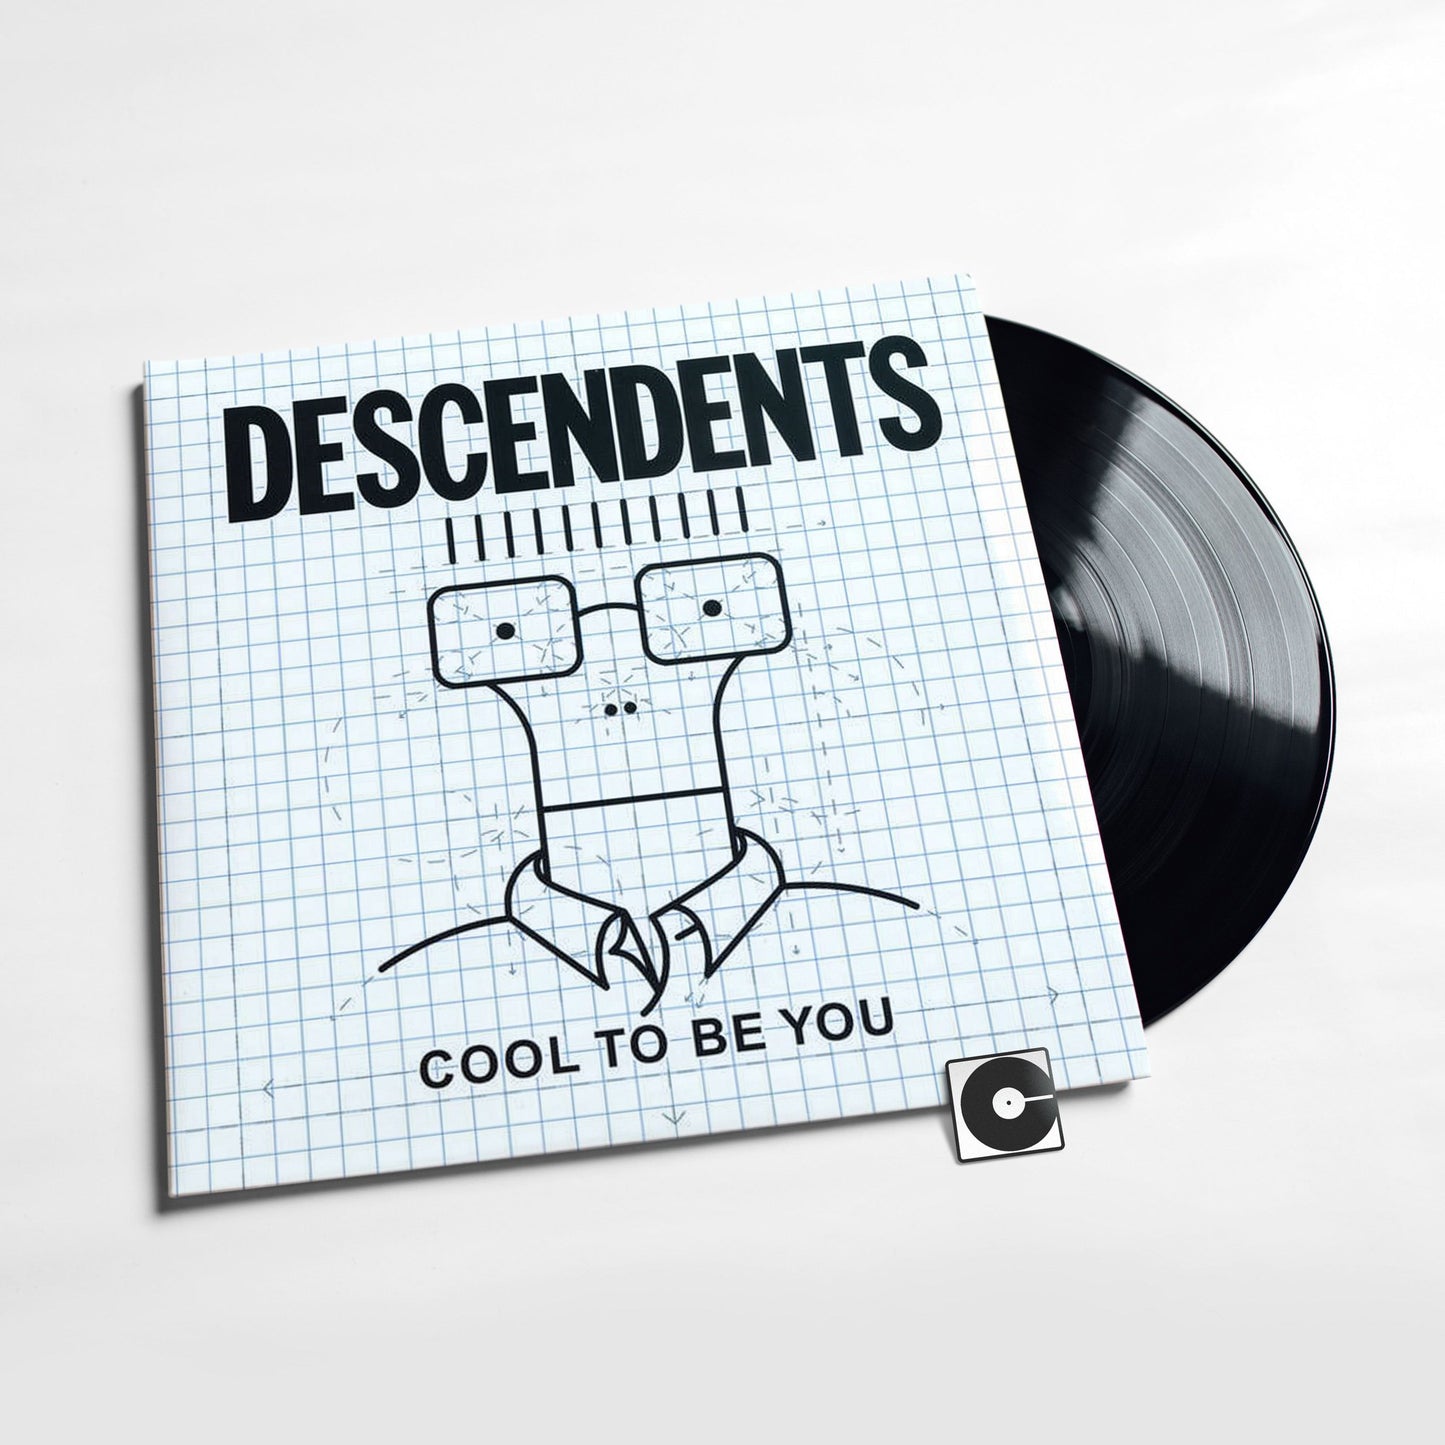 Descendents - "Cool To Be You"